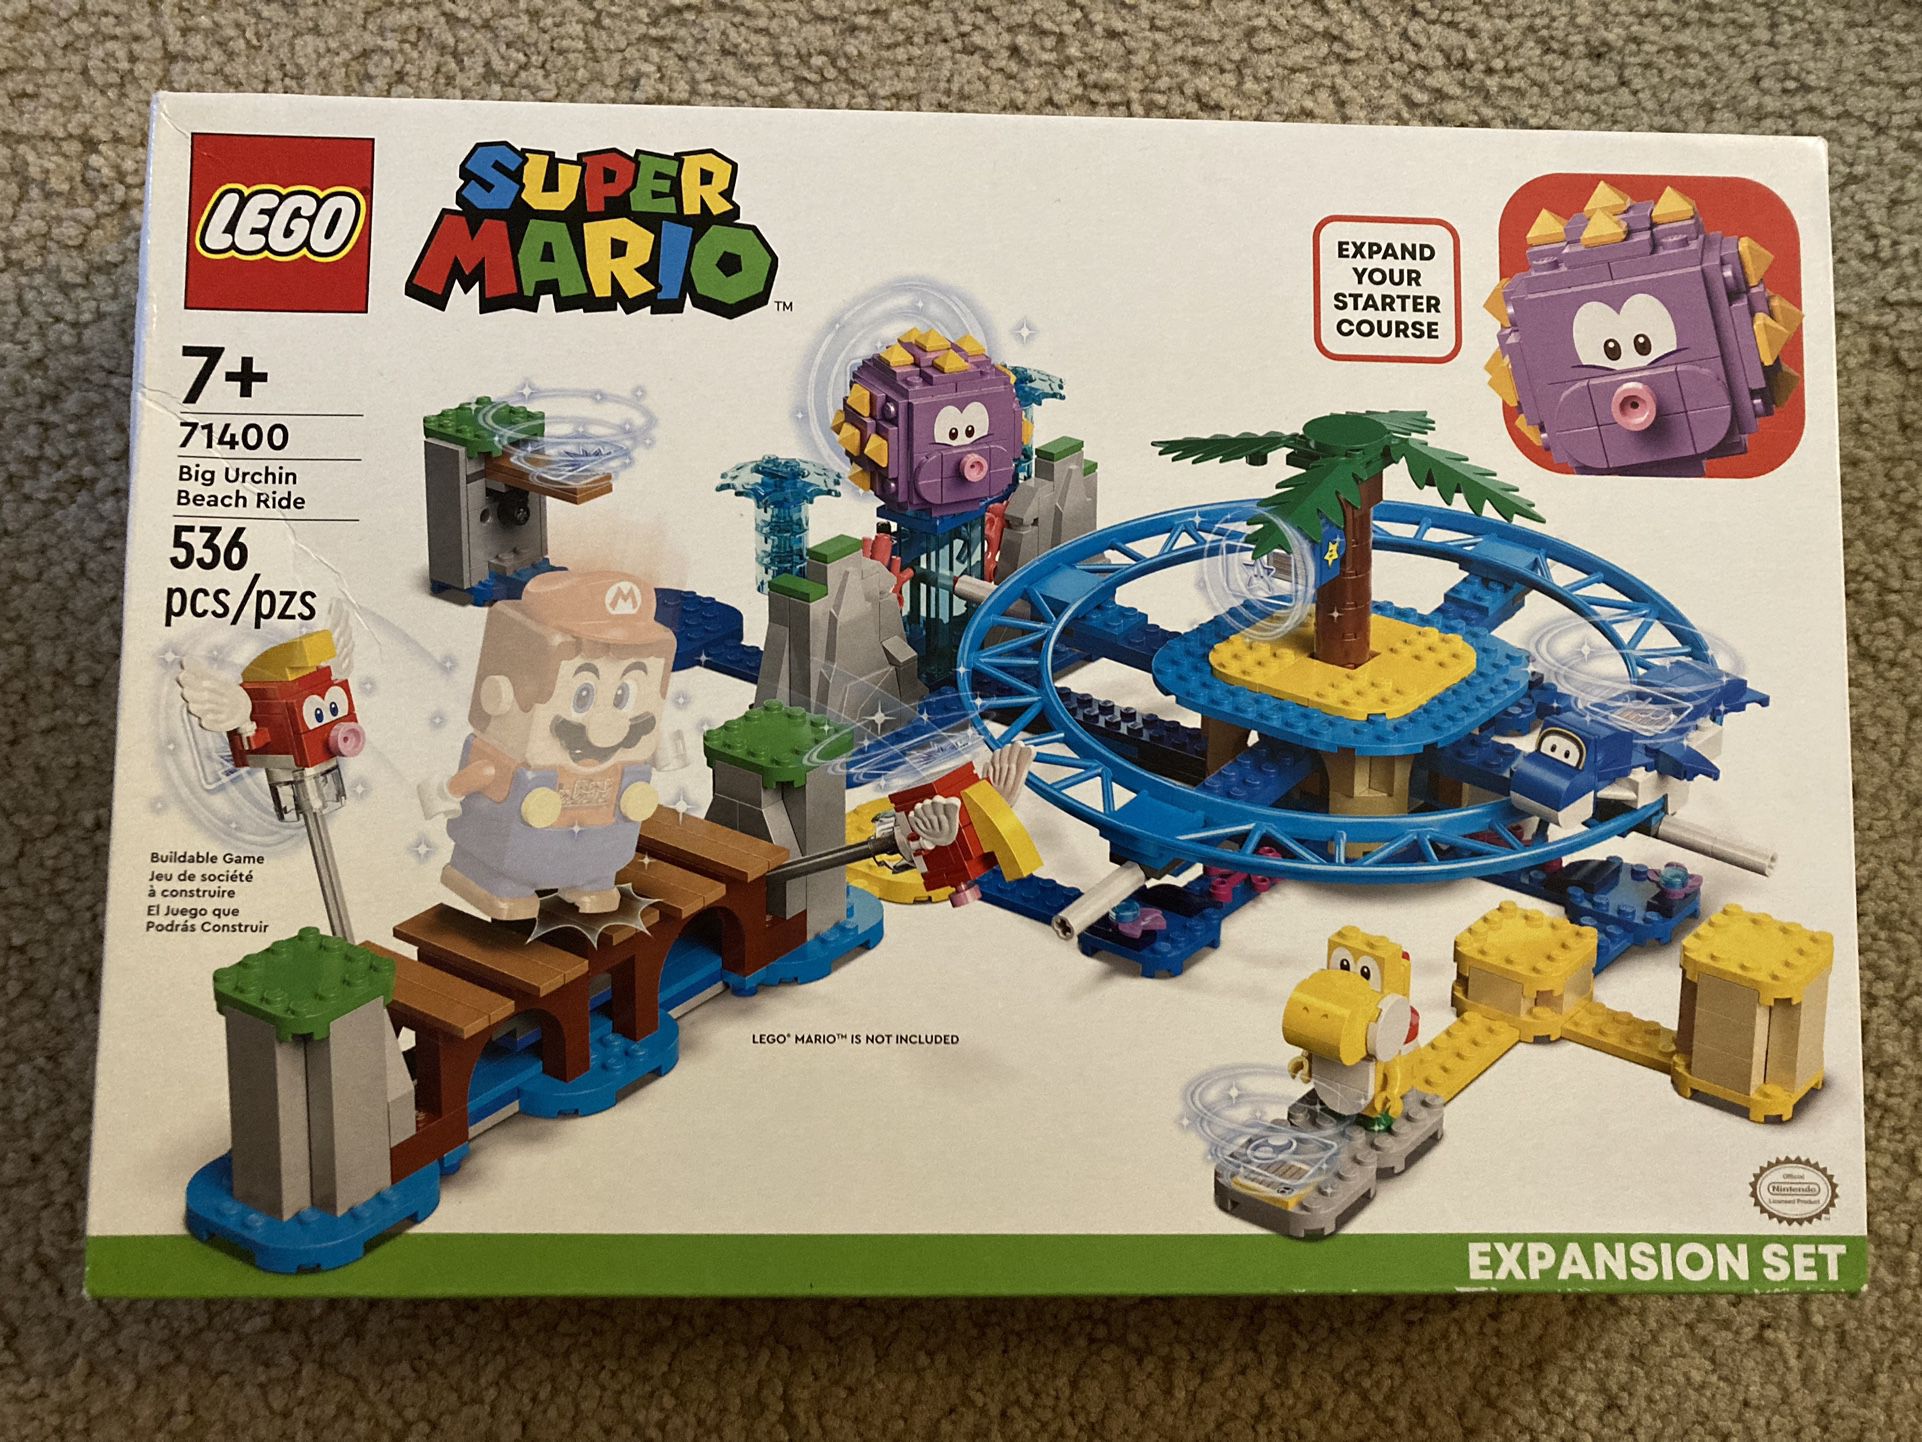 LEGO Super Mario Big Urchin Beach Ride Expansion Set 71400 Building Kit; Collectible Toy for Kids Aged 7 and up (536 Pieces